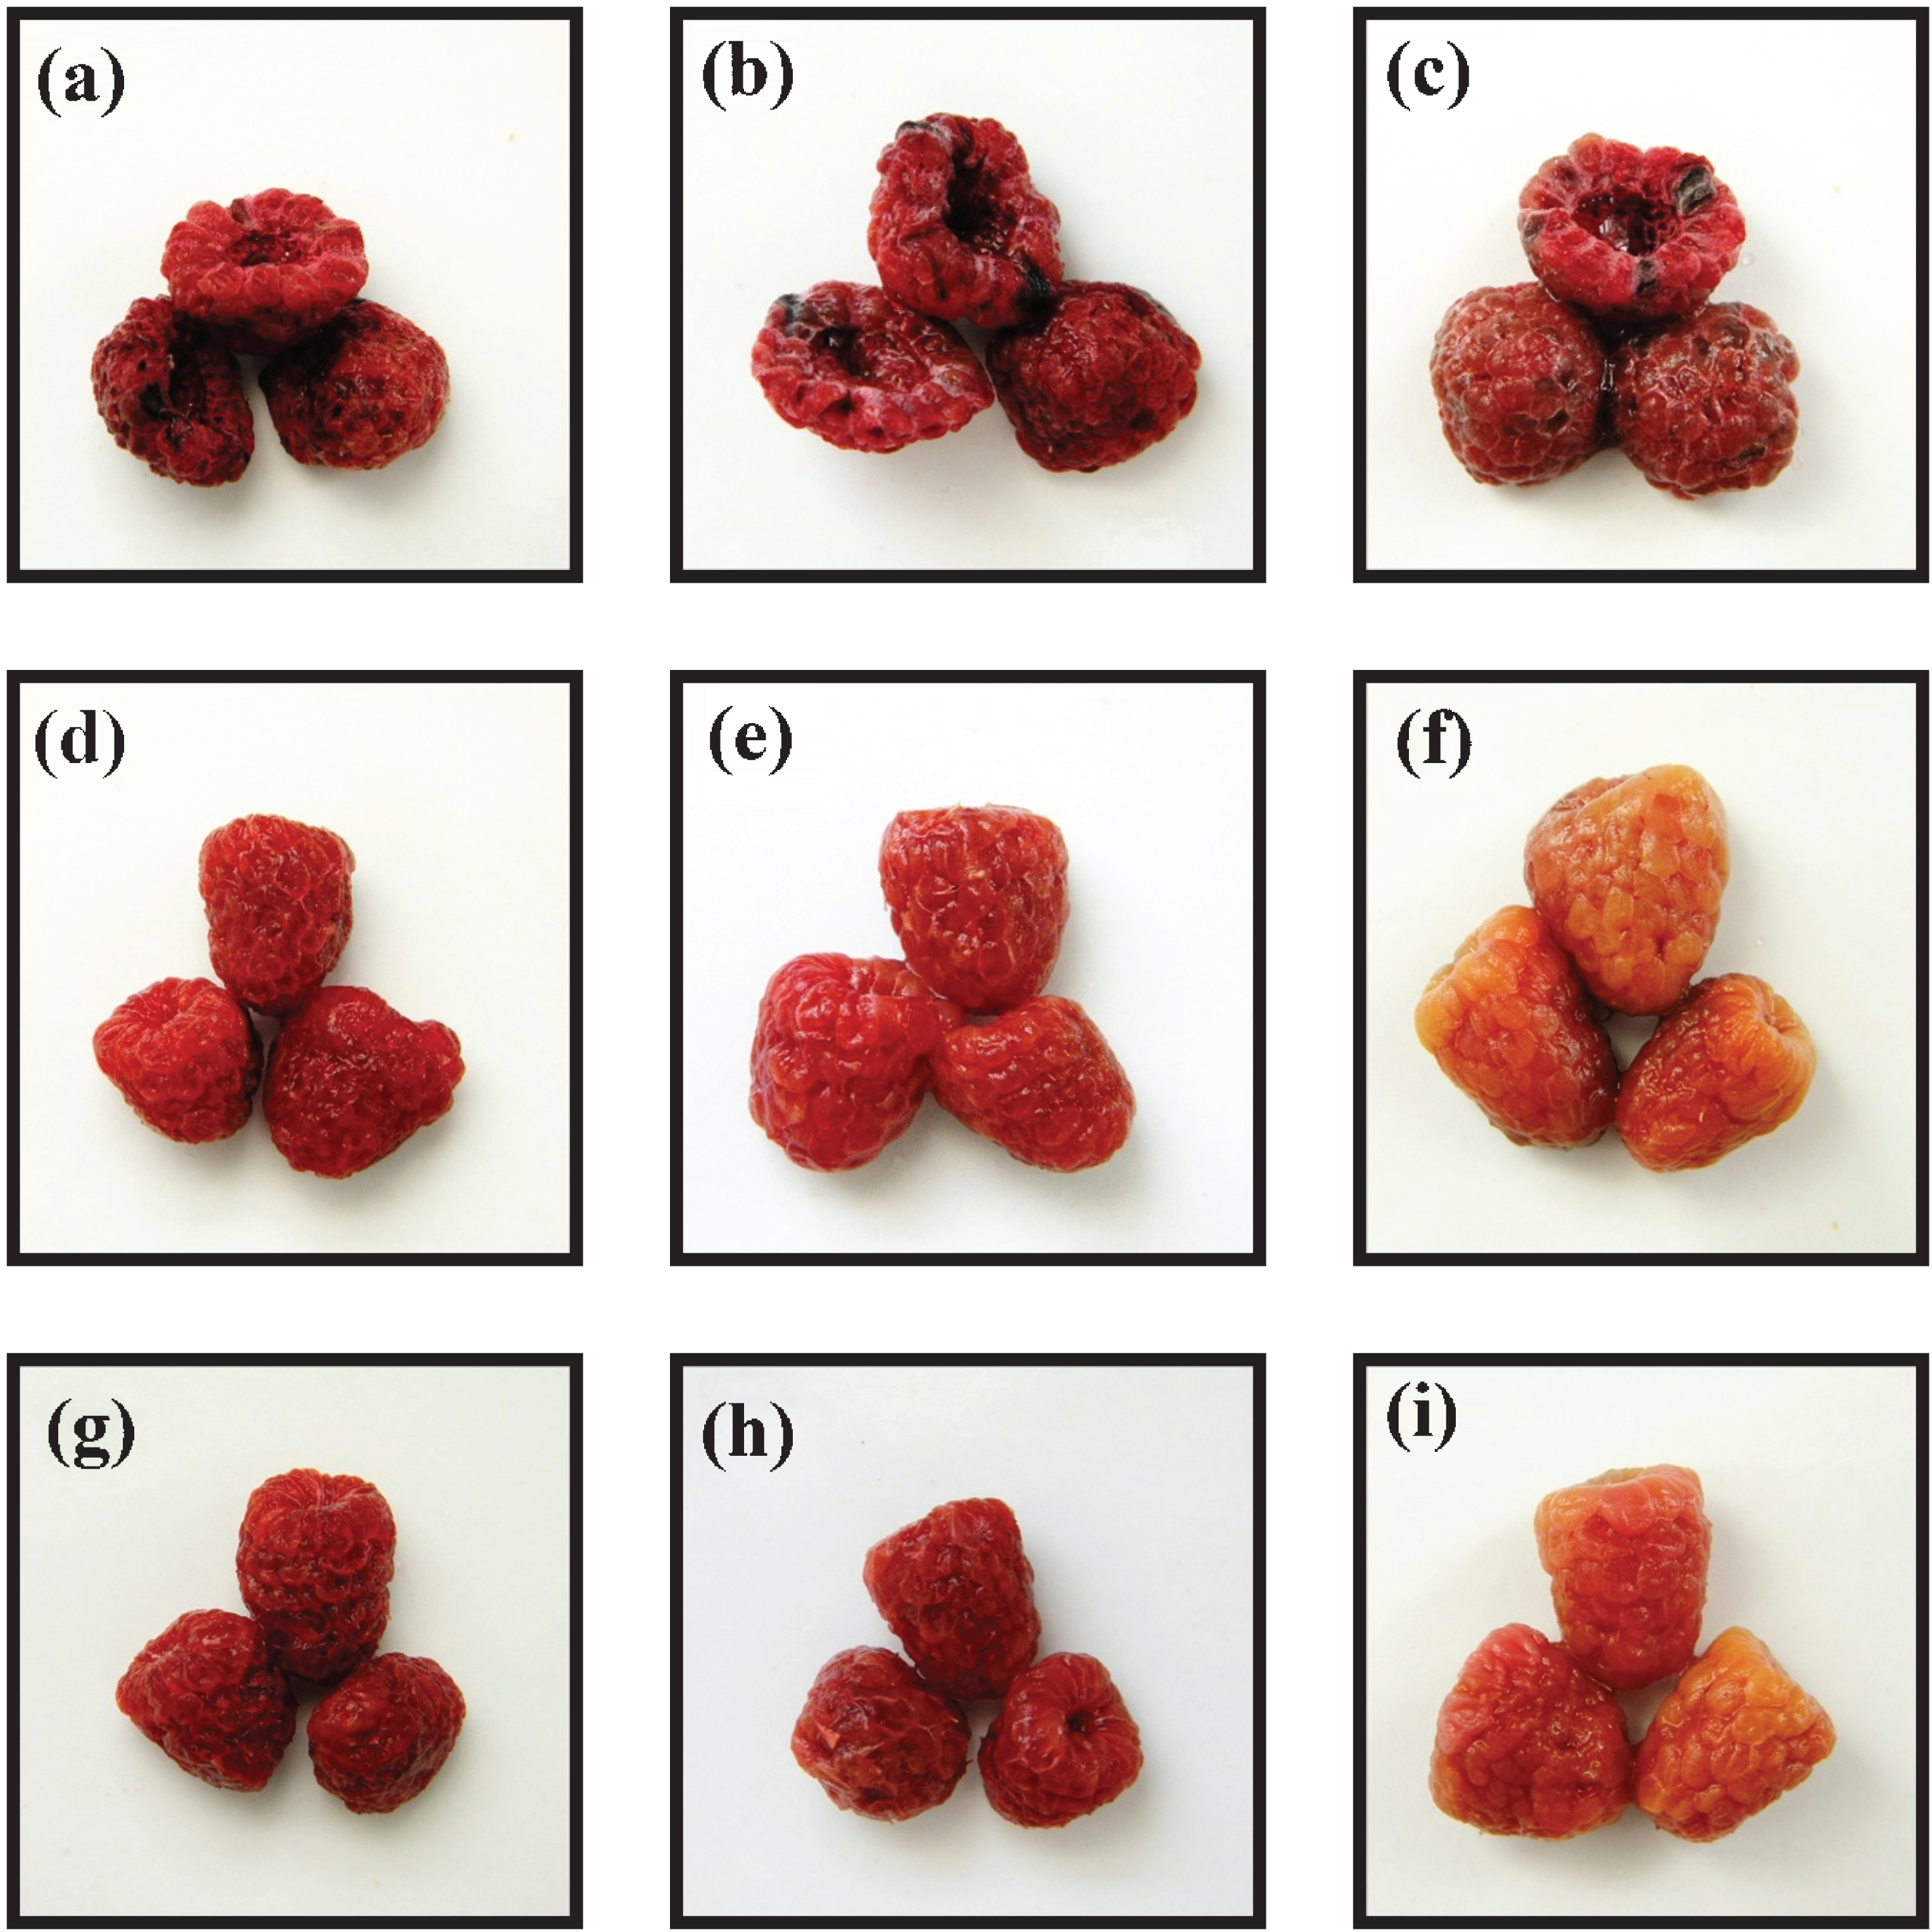 Images obtained after rehydration at 25°C of air-dried raspberries at different values of rehydration time. Control (C): 5 min (a), 20 min (b) and final (c). Wet infusion (WI-BAC): 5 min (d), 20 min (e) and final (f). Dry infusion (DI-BAC): 5 min (g), 20 min (h) and final (i).